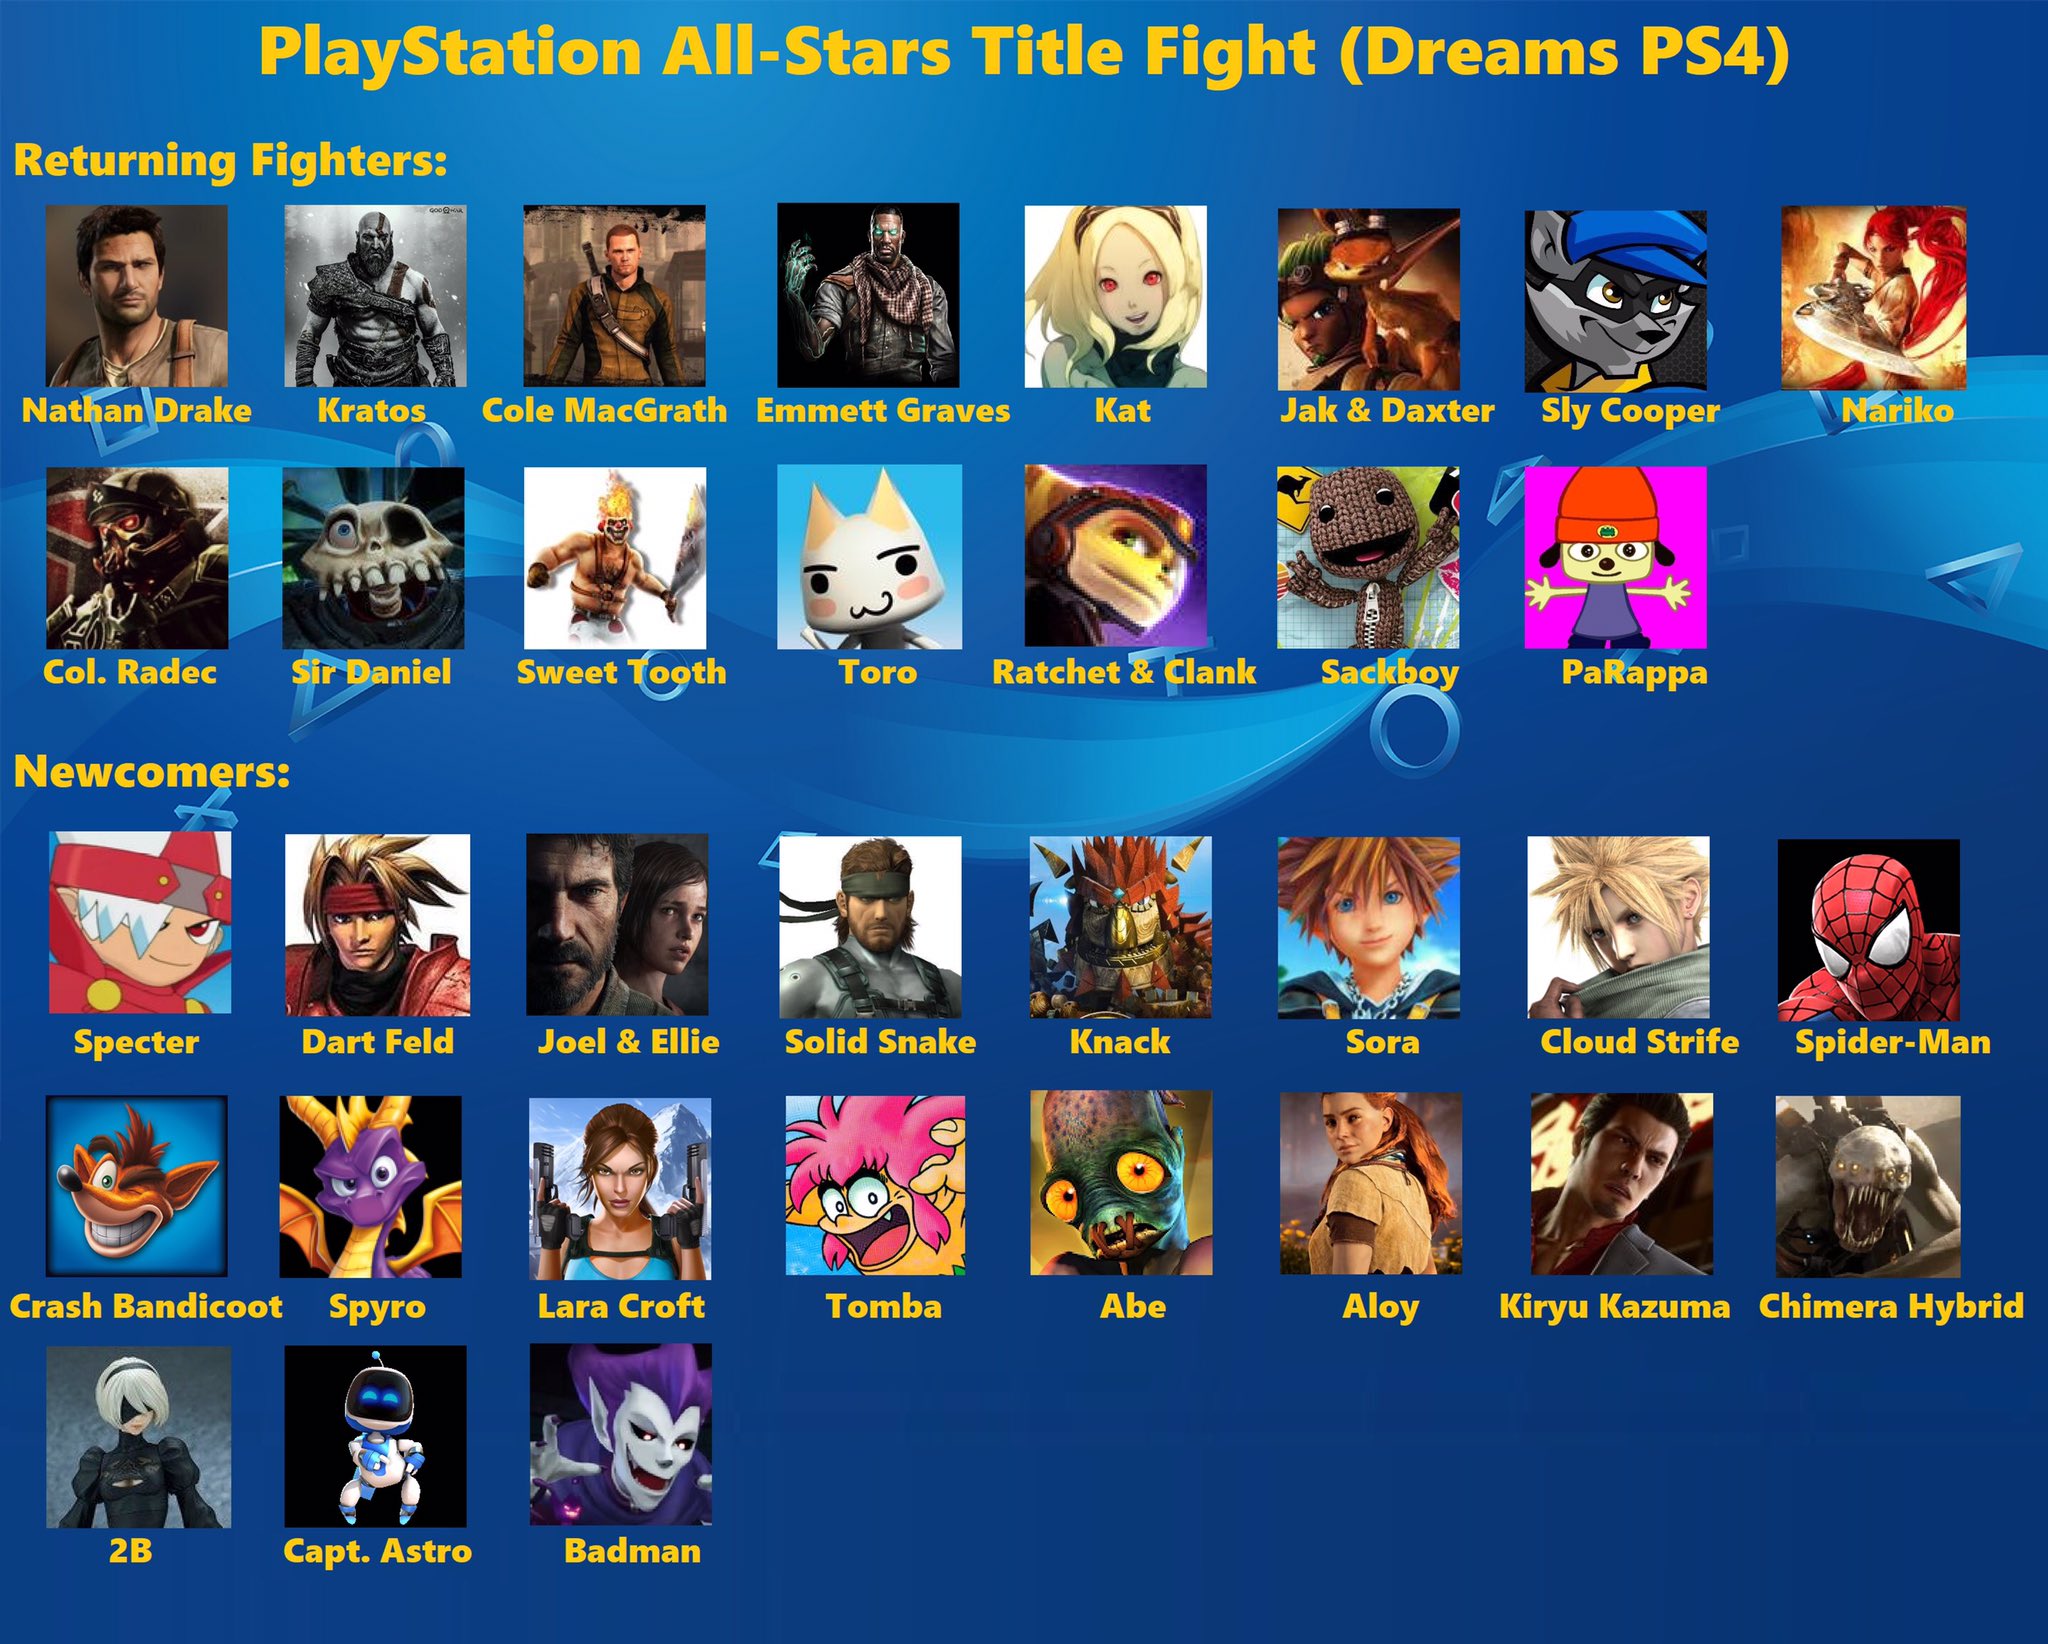 derefter universitetsstuderende licens Playstation All-Stars Revival on Twitter: "Exciting news! Attached is the  official starting roster for the PlayStation All-Stars fan game being  produced by @AtomicProducti3 on Dreams for PS4. https://t.co/O590aIDG8U" /  Twitter